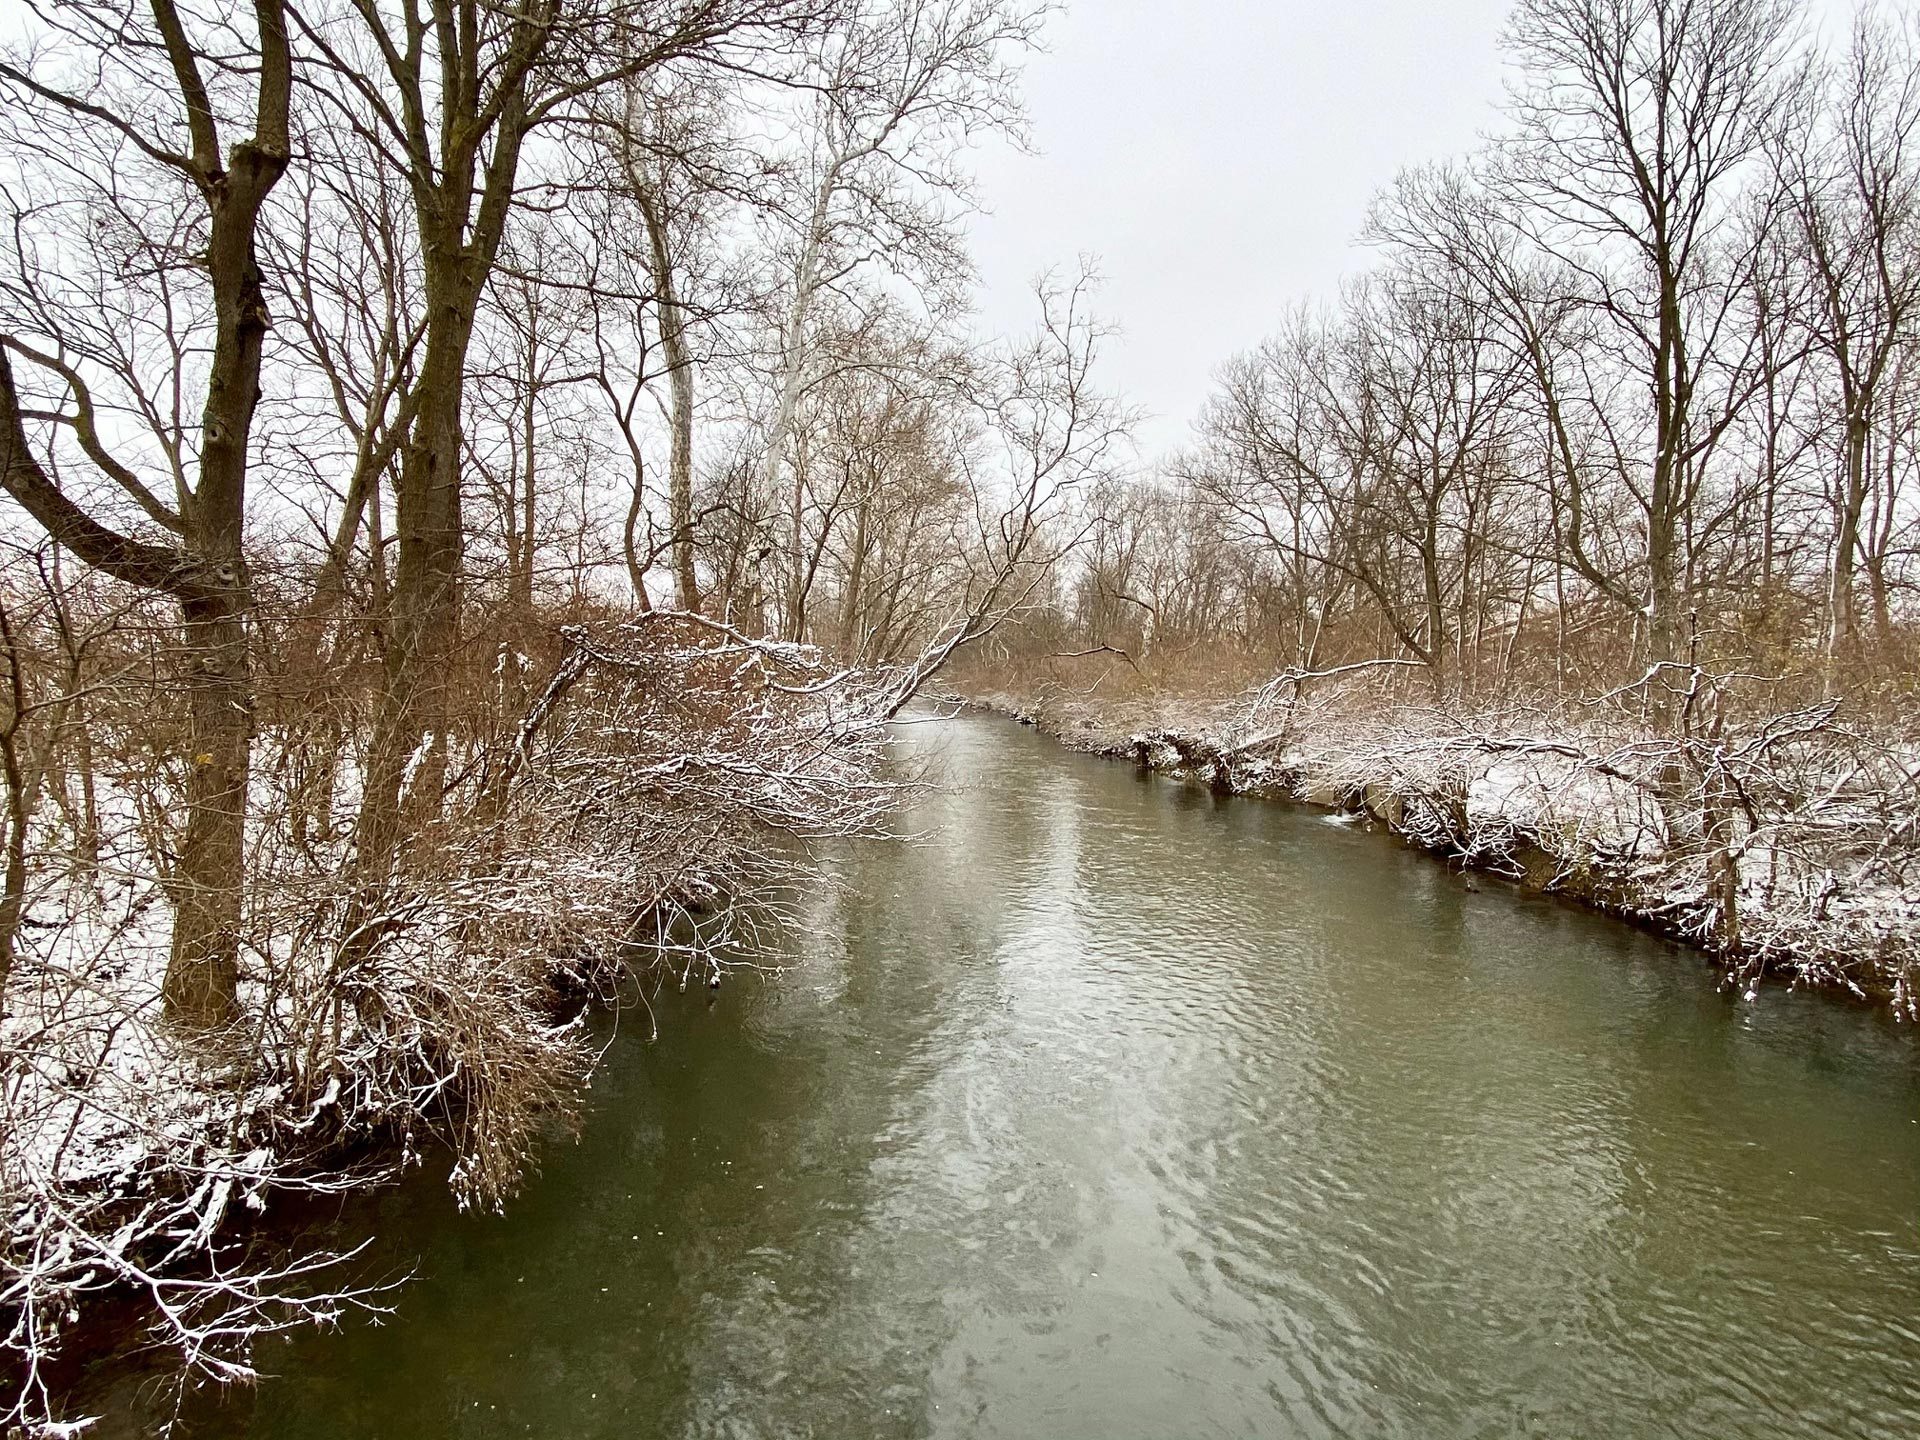 River in Ohio with snowy trees along the side.